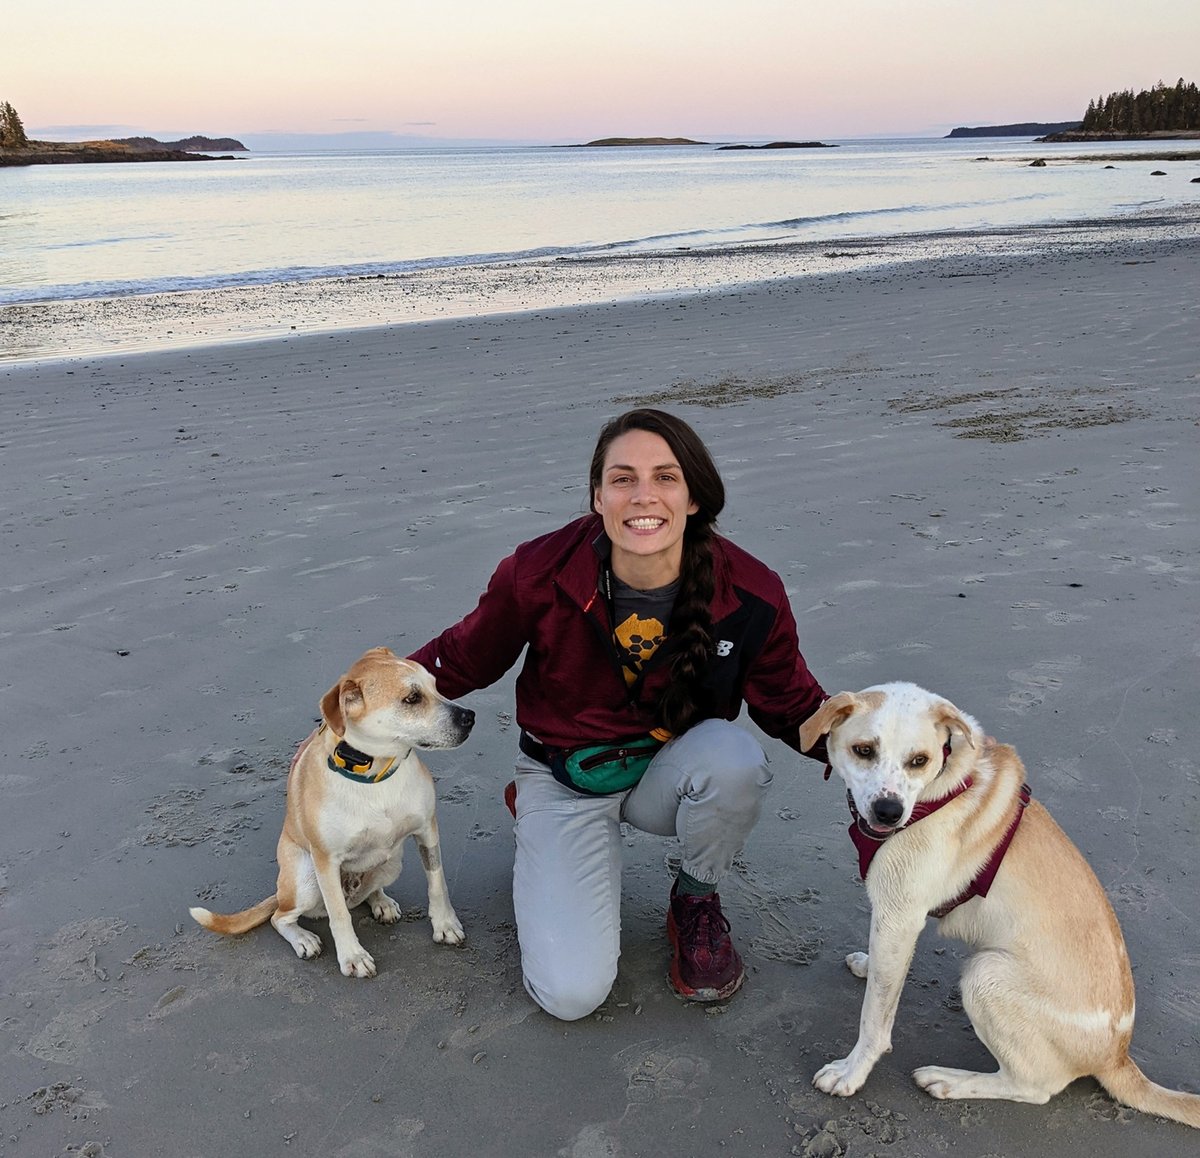 Dr. Ashten with her 2 dogs, Jasper and Opal